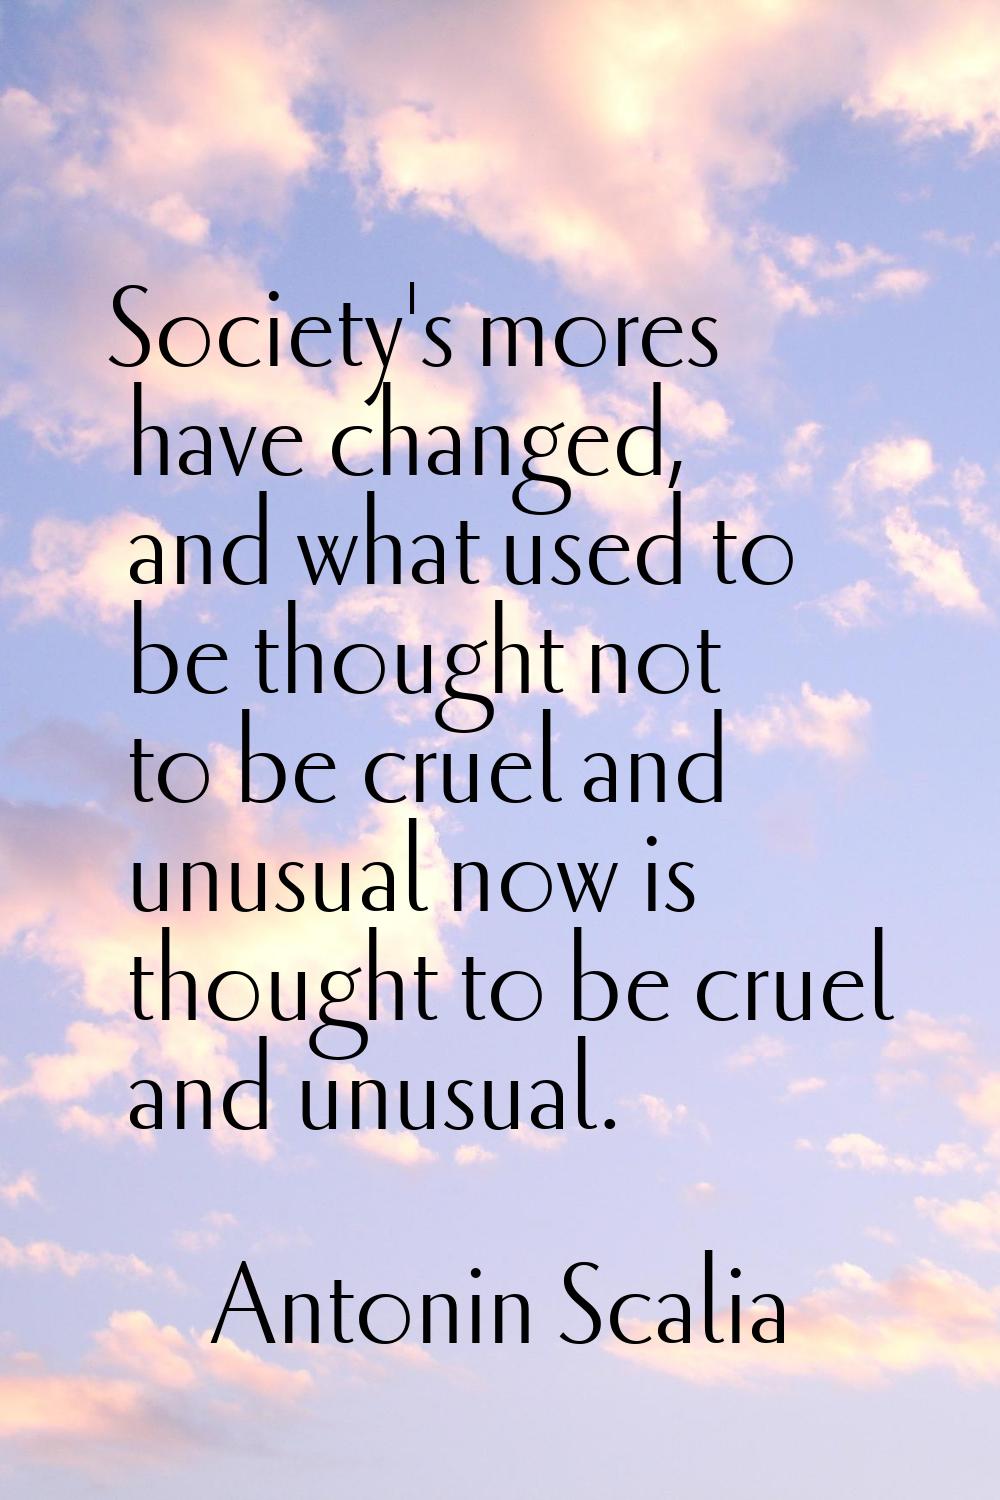 Society's mores have changed, and what used to be thought not to be cruel and unusual now is though